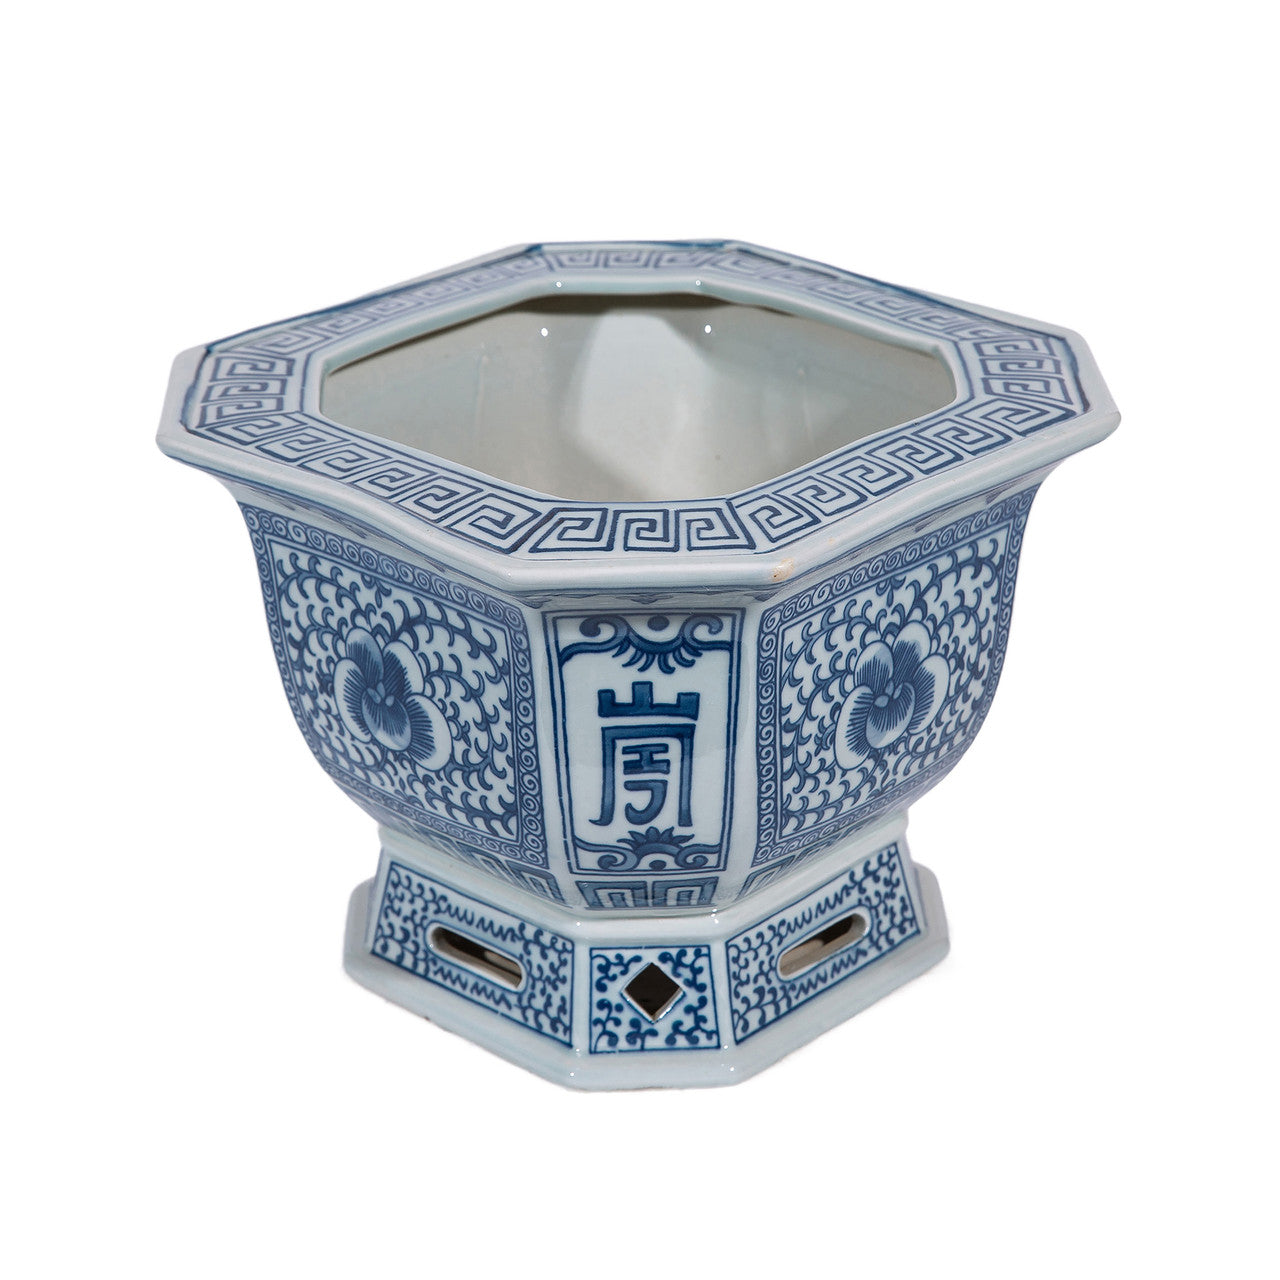 Blue and White Porcelain Twisted Lotus Motif Square Planter